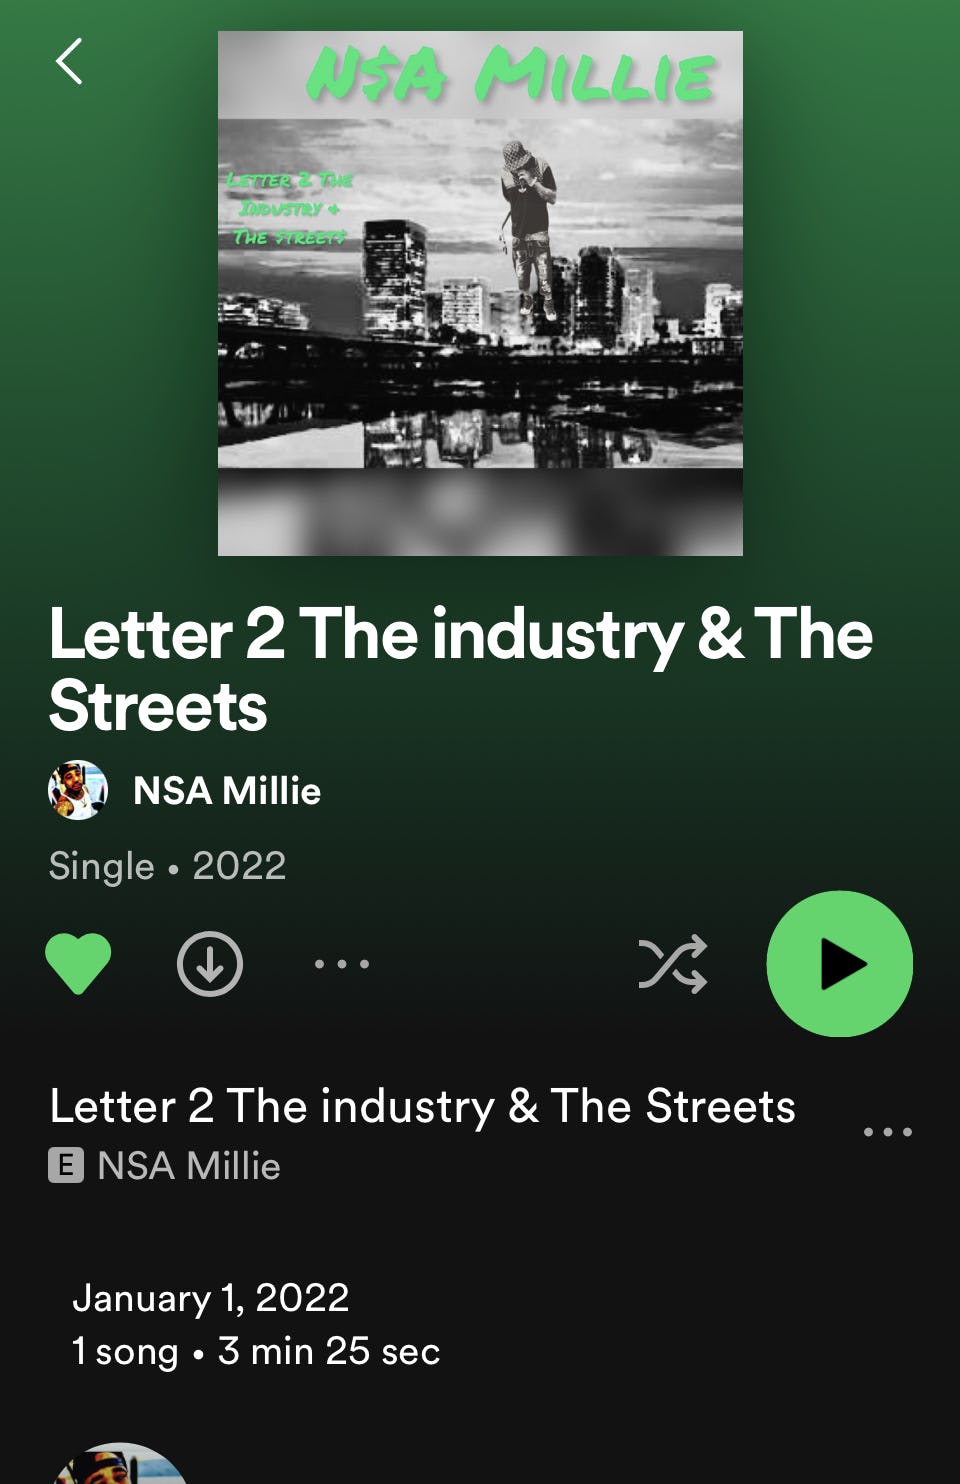 Letter 2 the industry / the streets